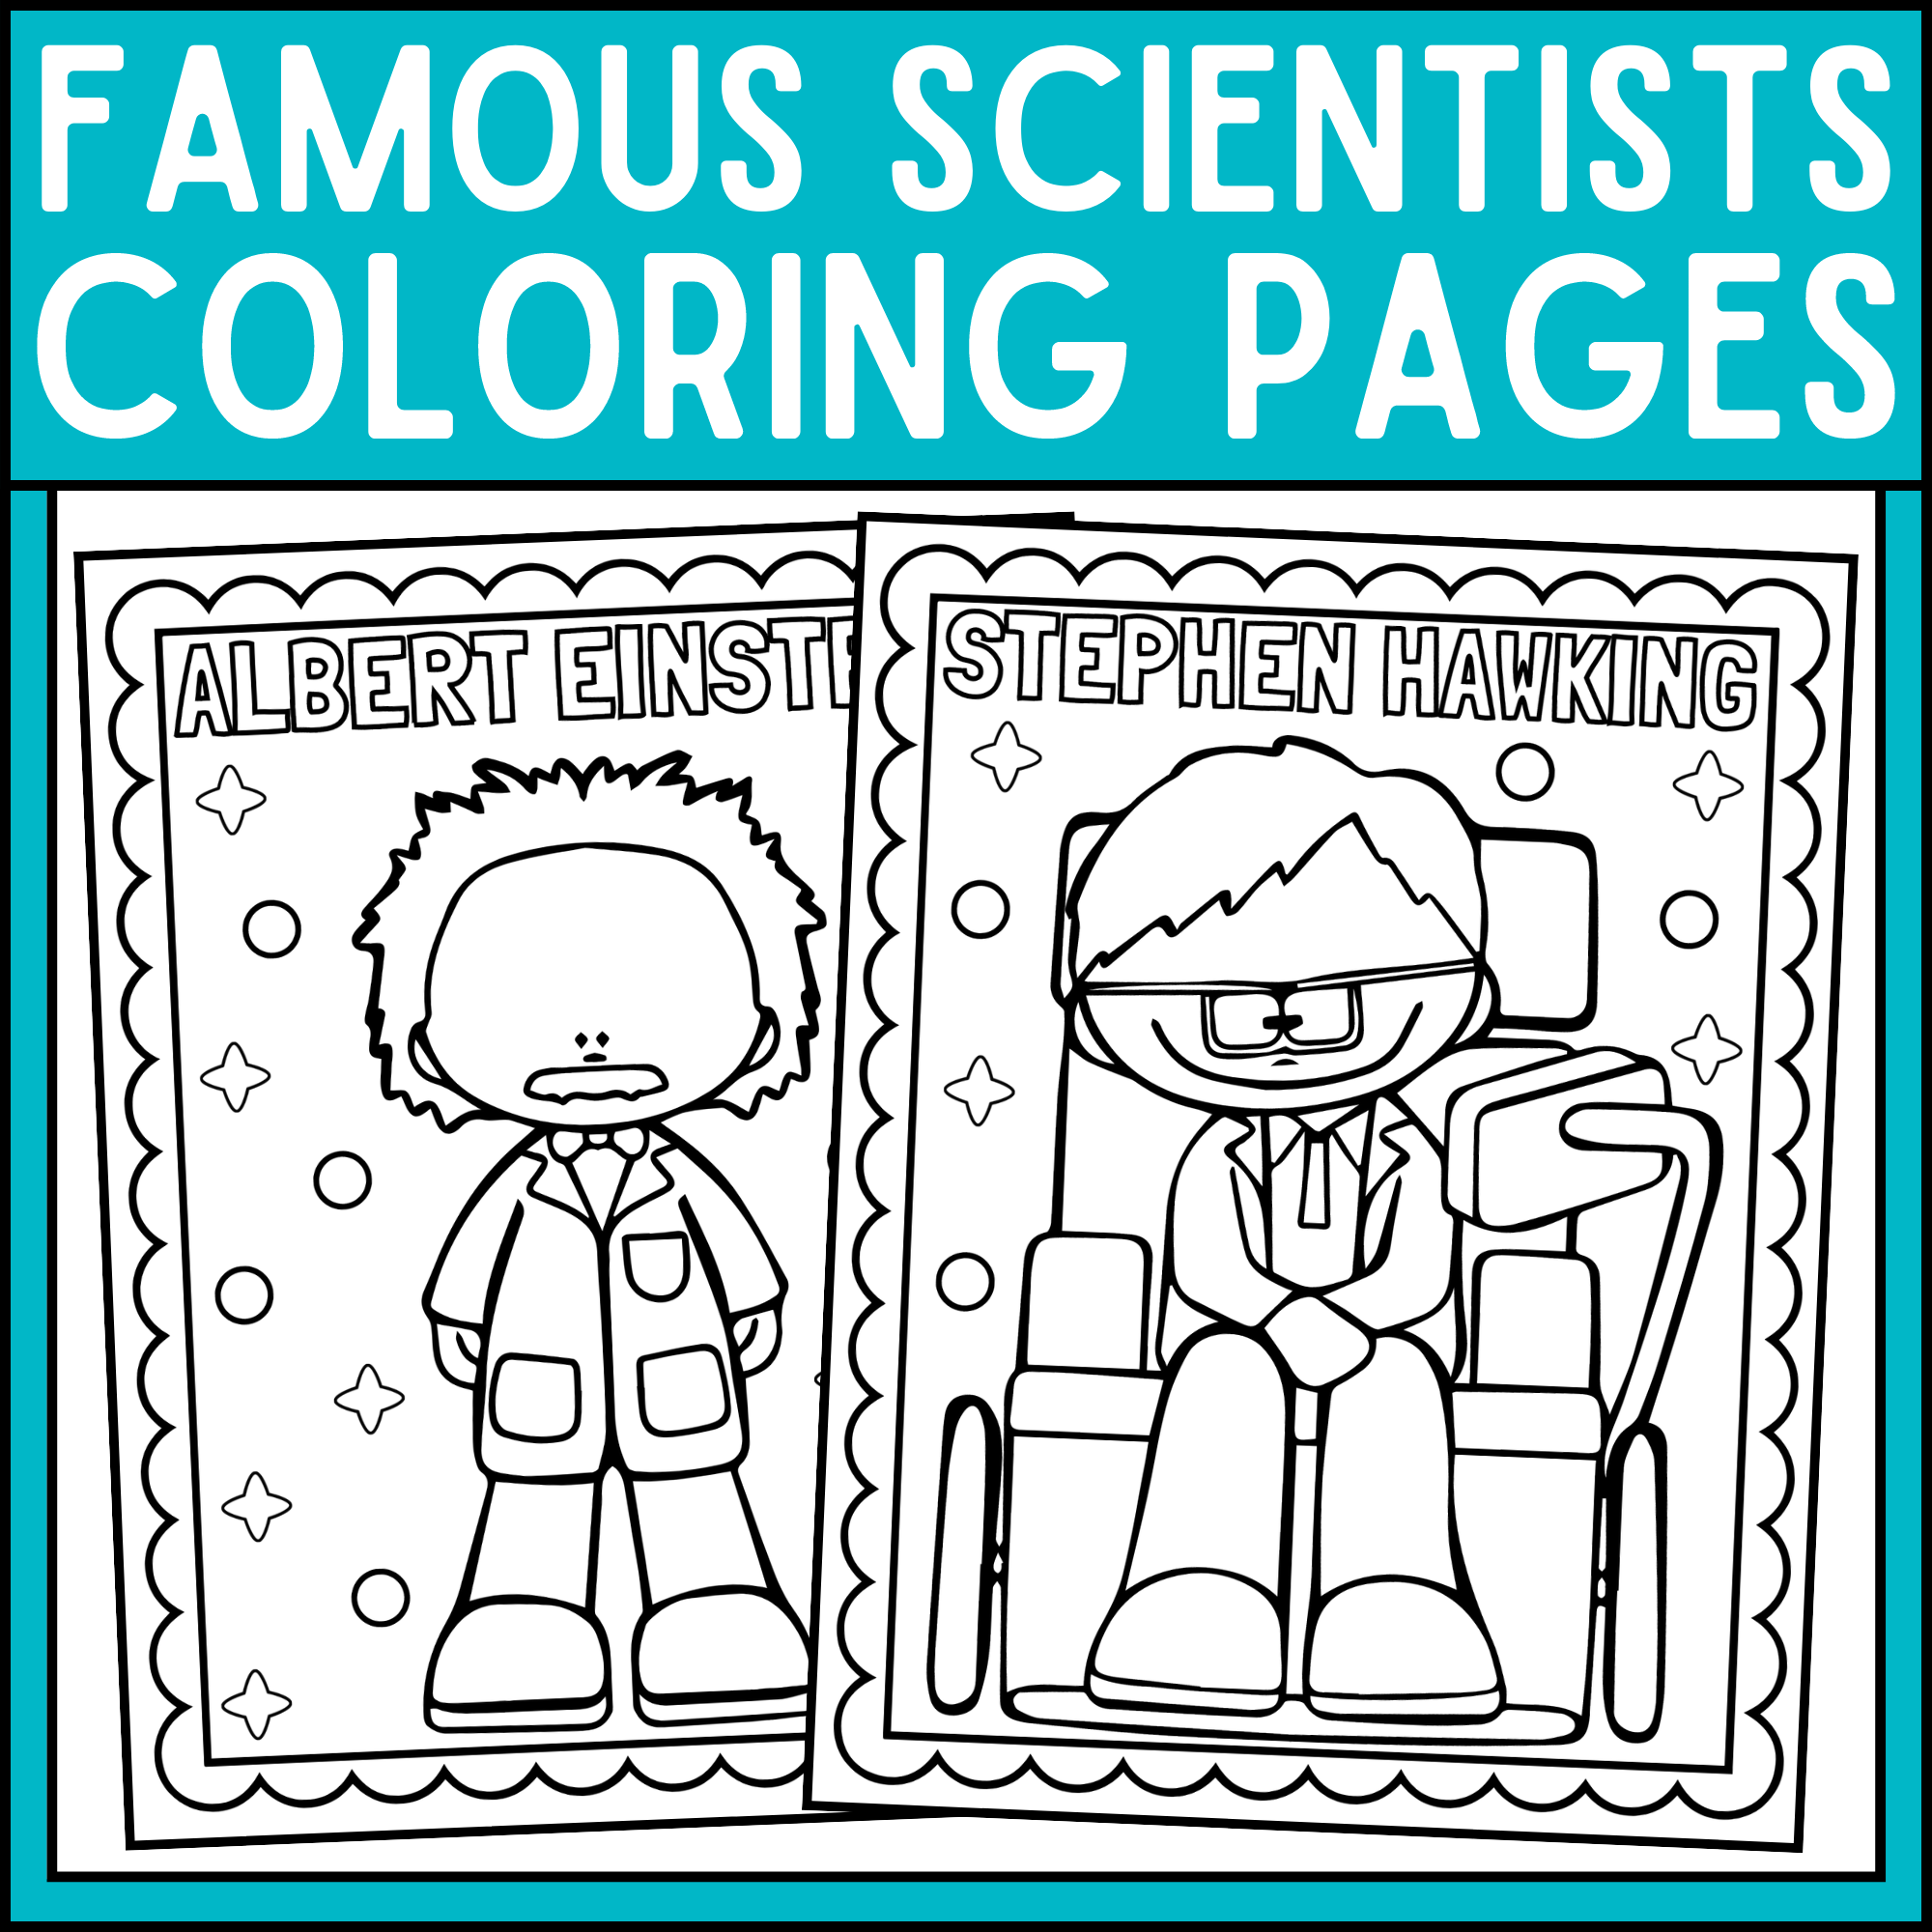 Famous scientists in history coloring pages scientists coloring pages made by teachers